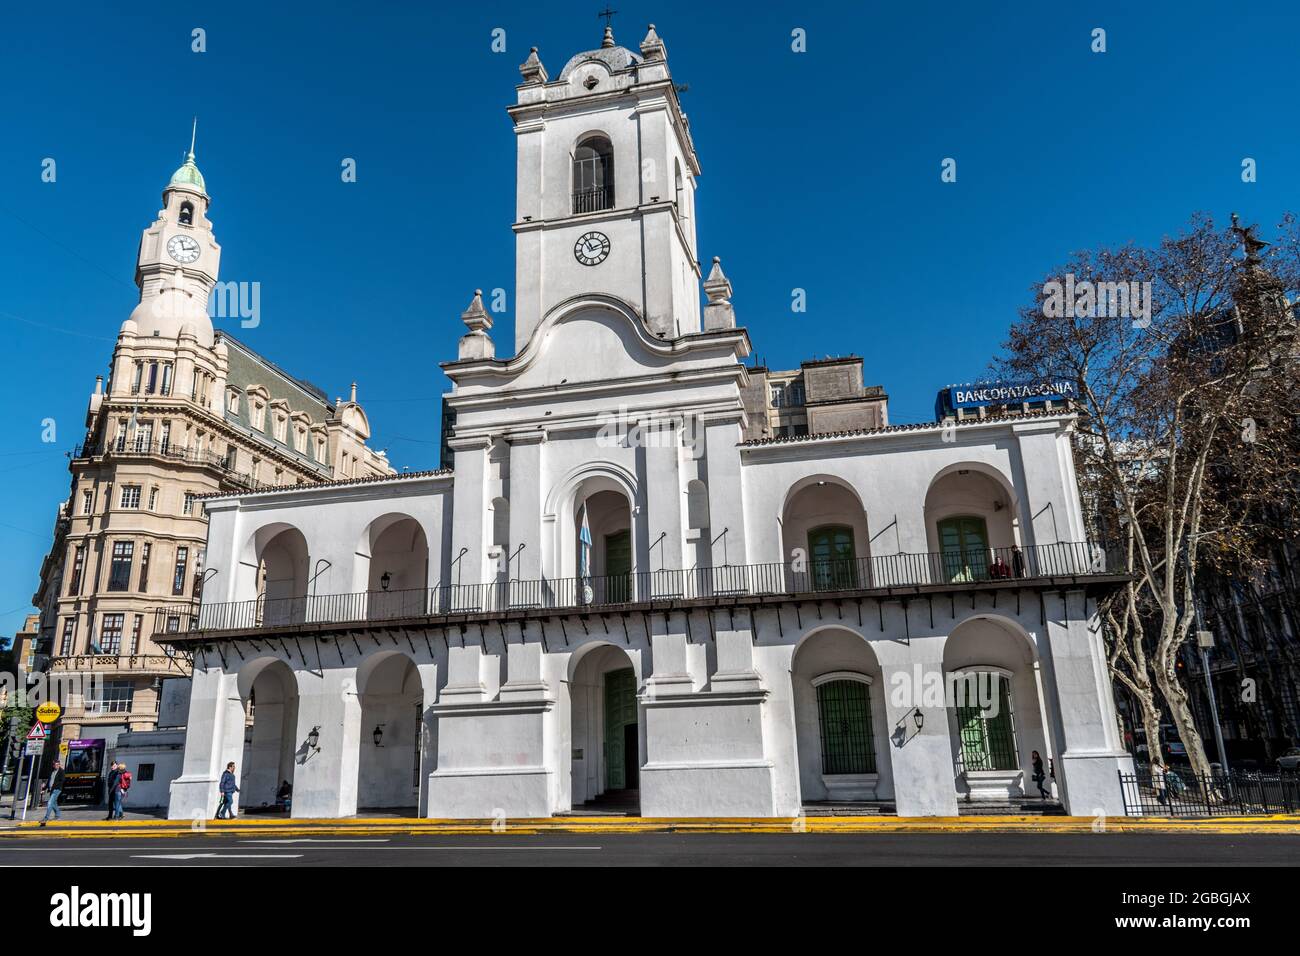 Low angle view of the Cabildo de Buenos Aires in the Plaza De Mayo, Buenos Aires, Argentina Stock Photo